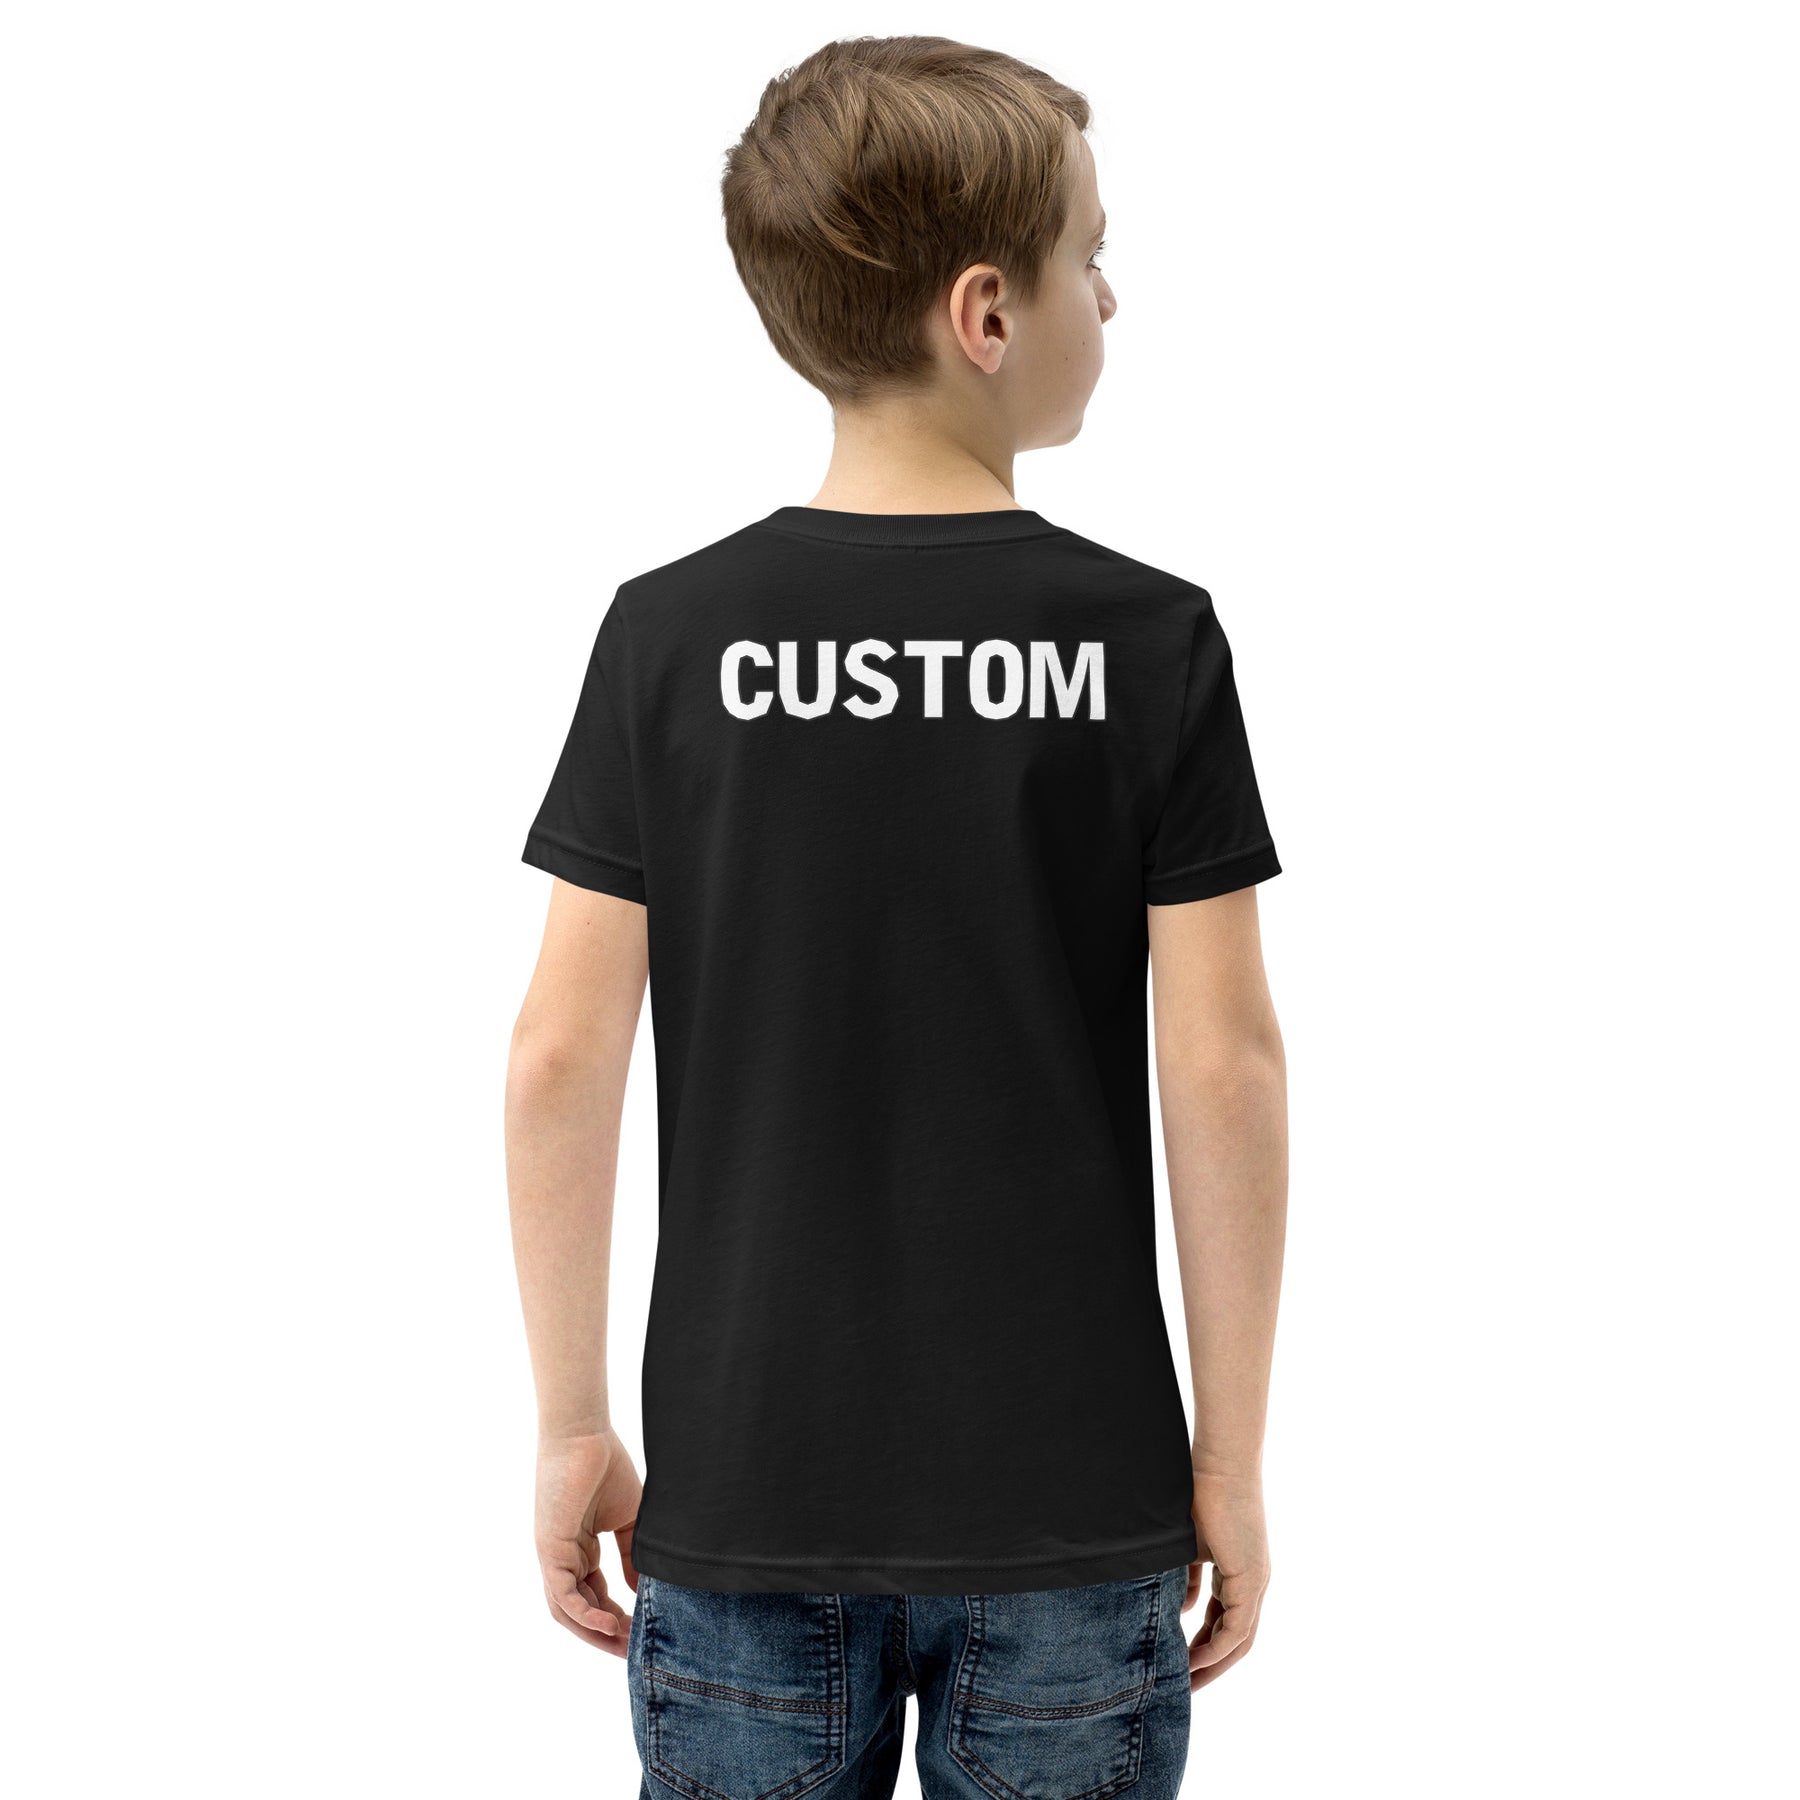 10th Birthday Astronaut Shirt - Space Themed Double Digits Celebration - Planetary Balloon Design